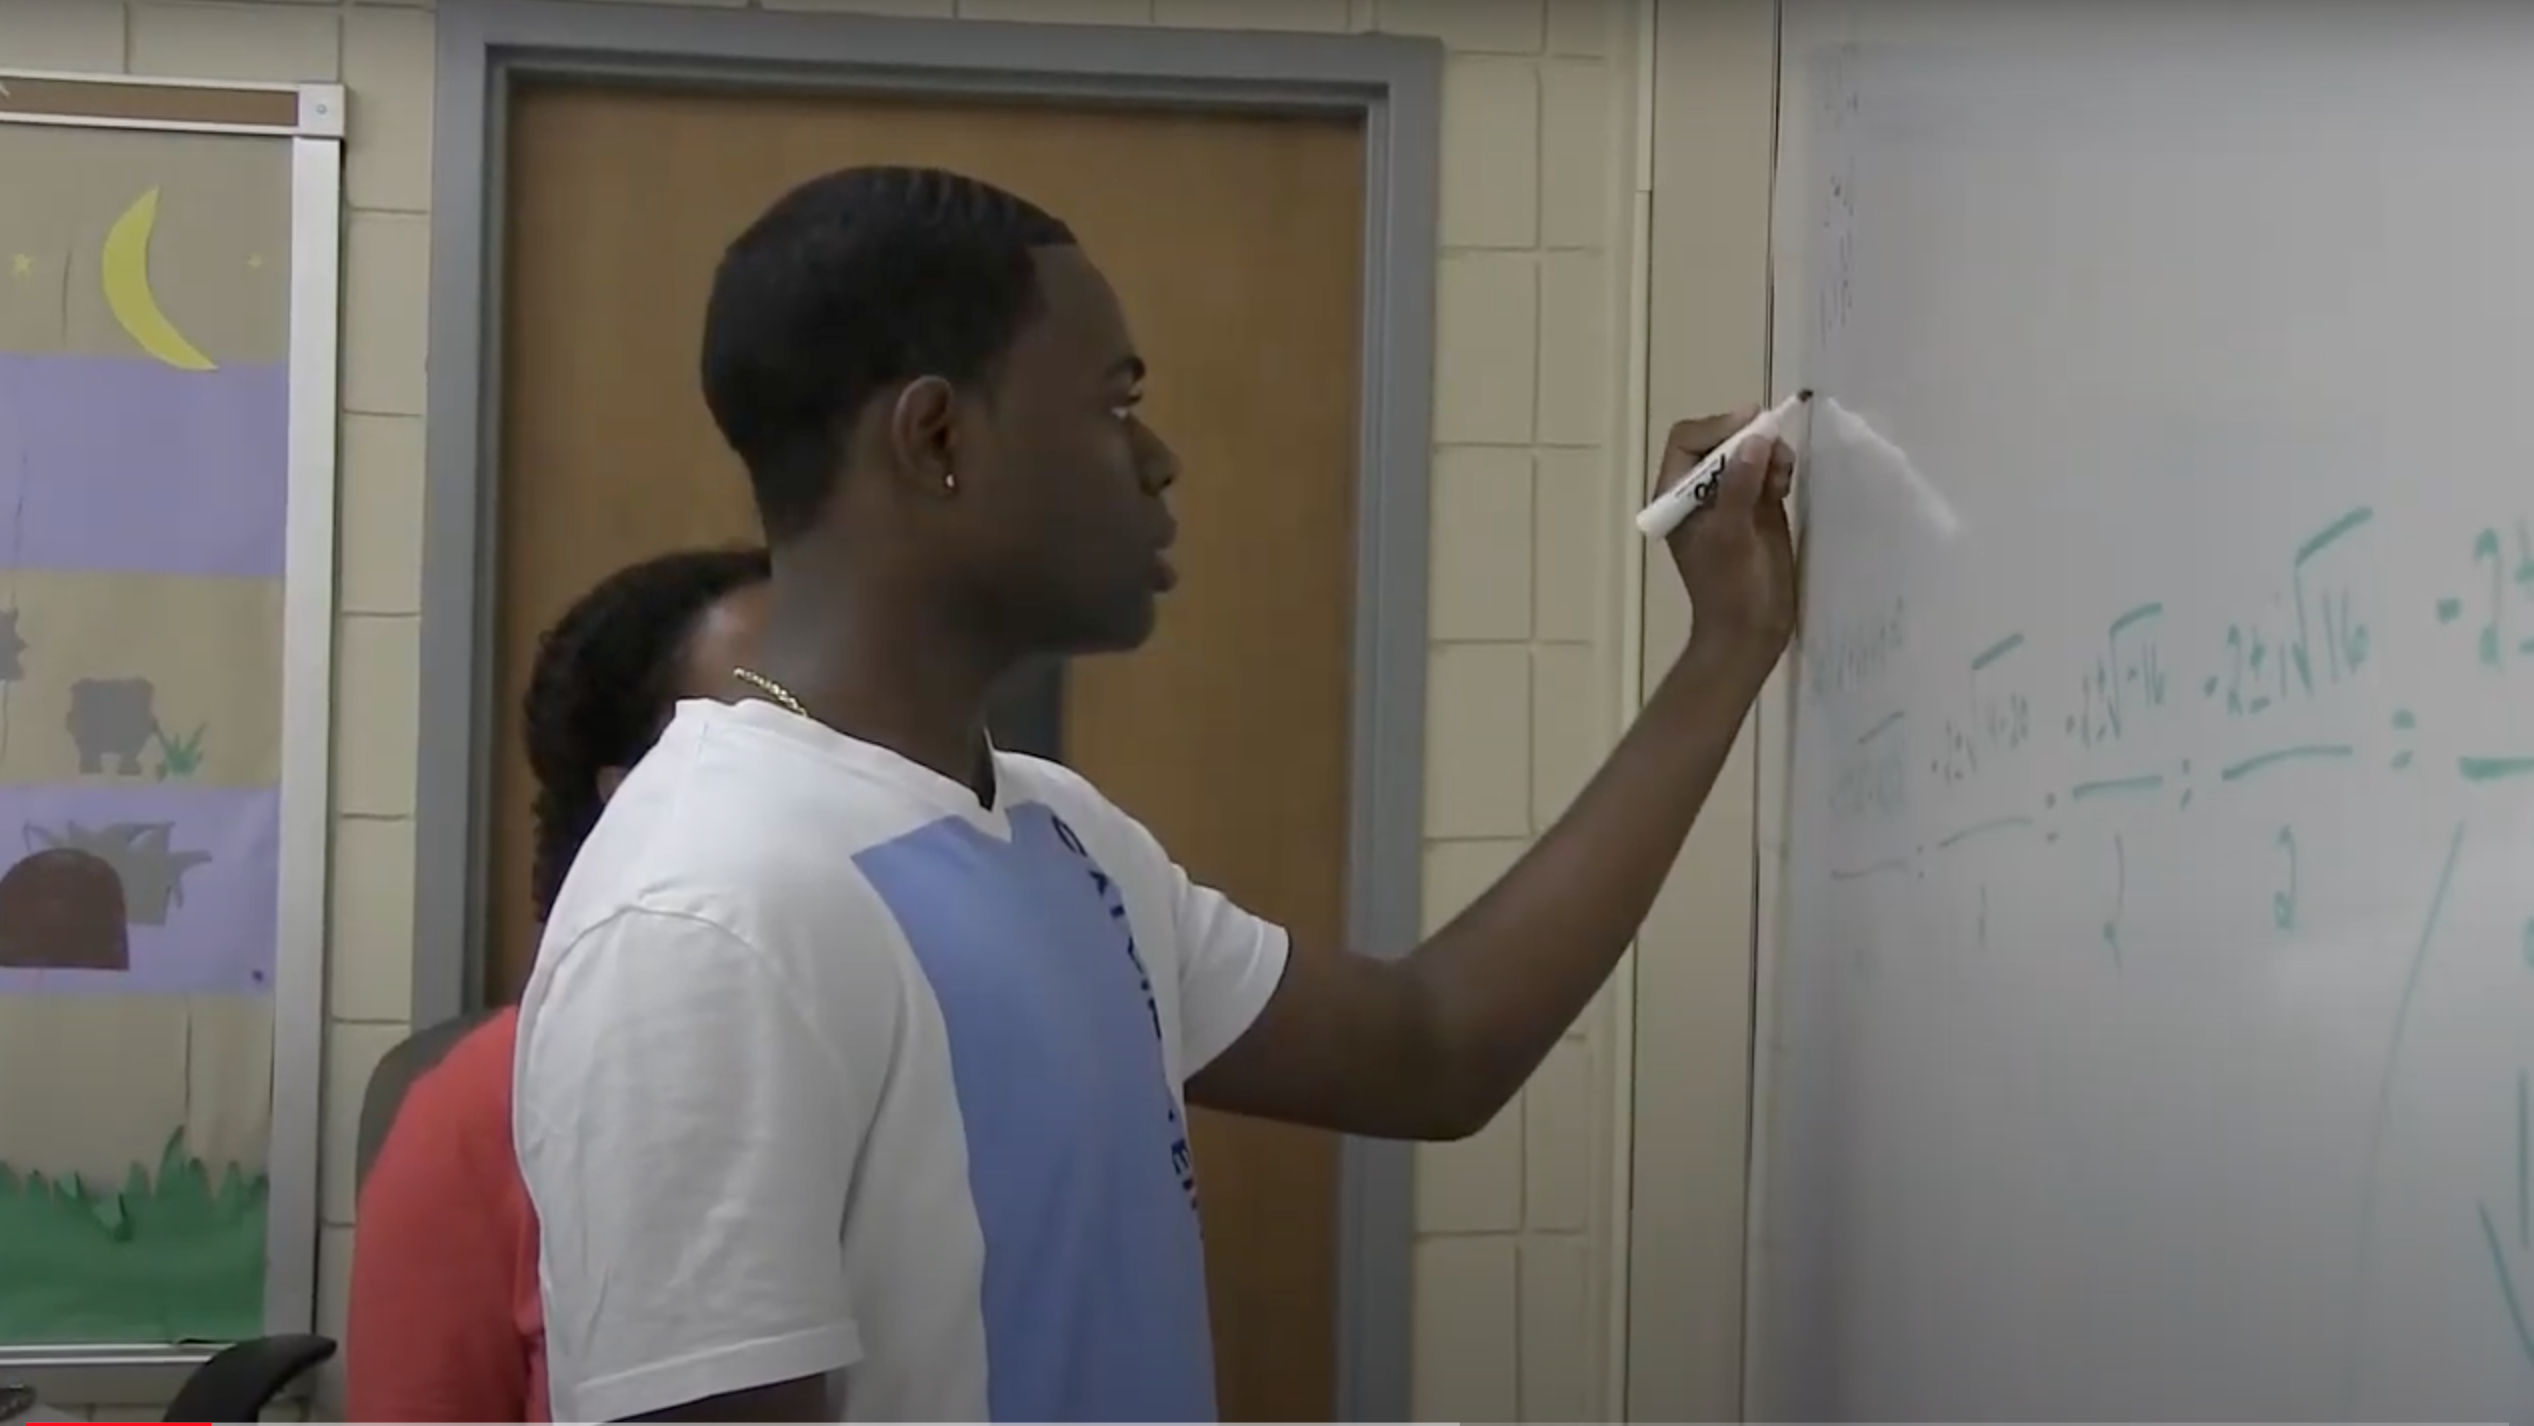 Student writing with a marker on a whiteboard in a classroom